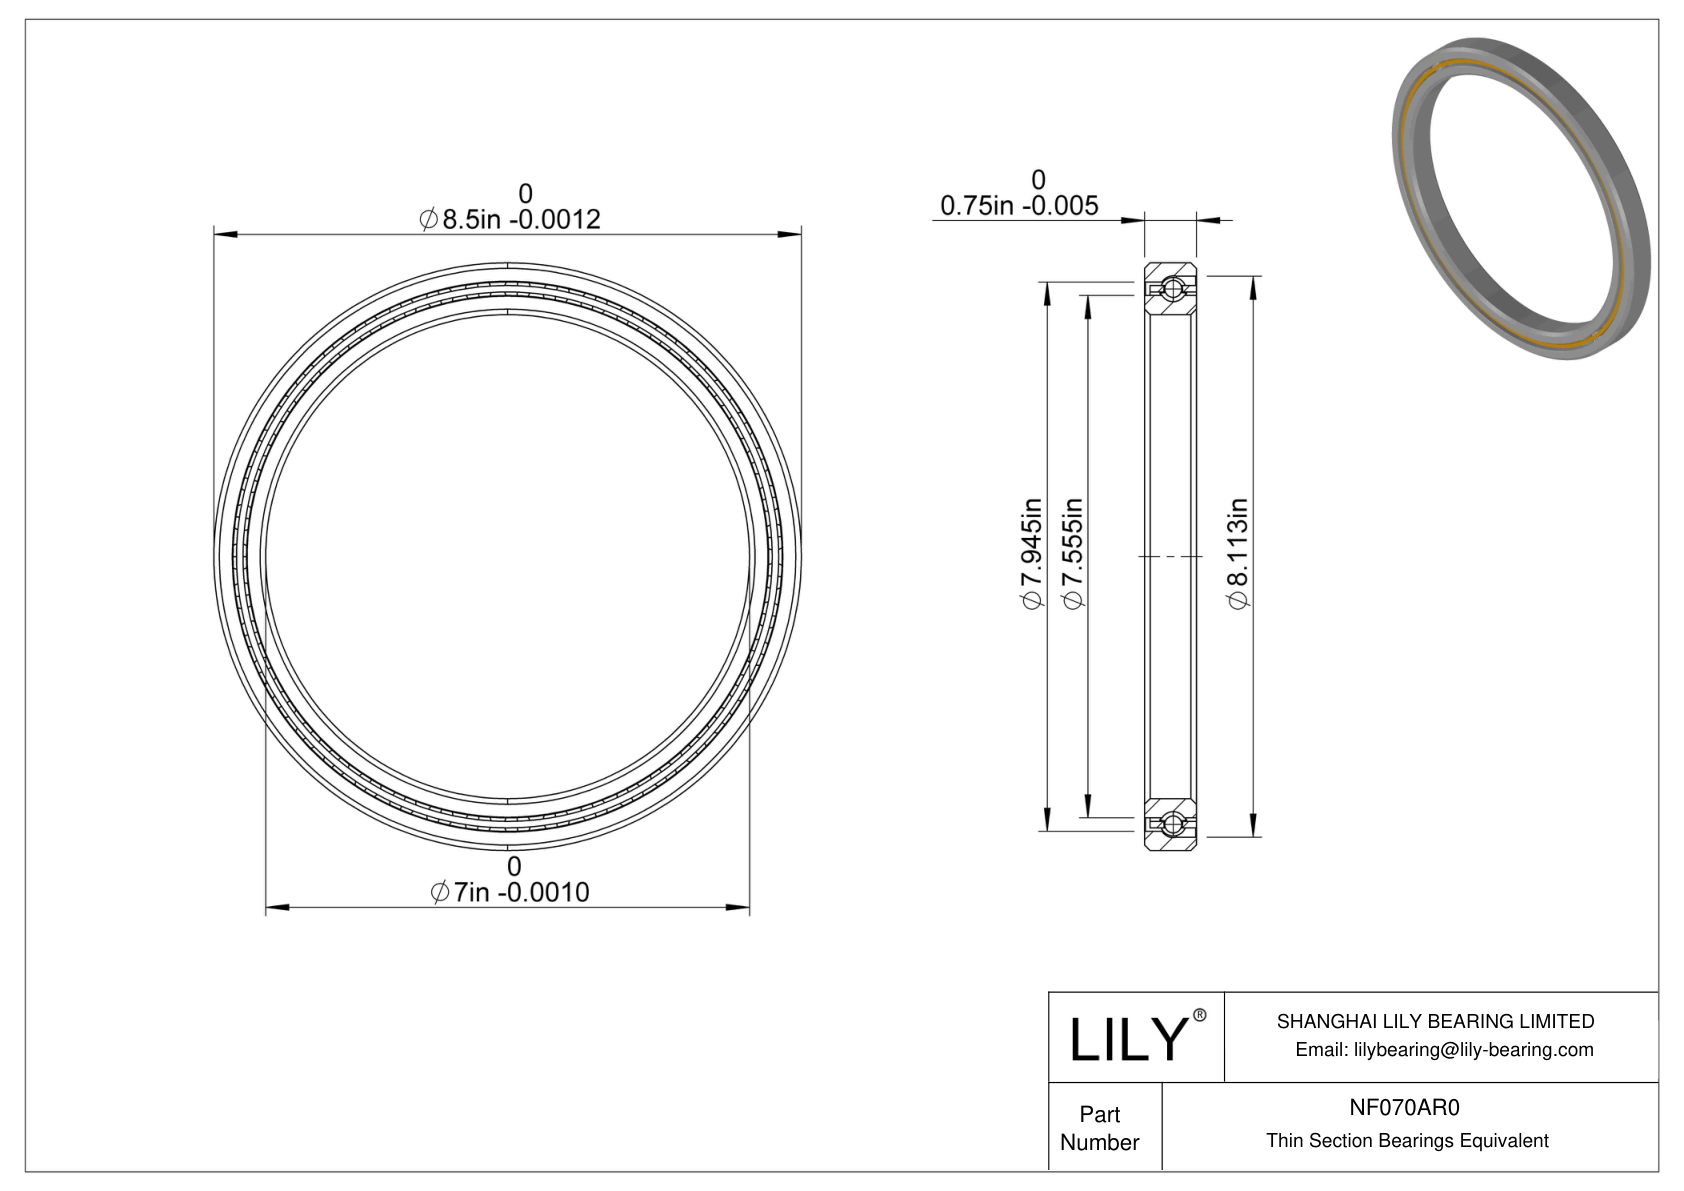 NF070AR0 Constant Section (CS) Bearings cad drawing